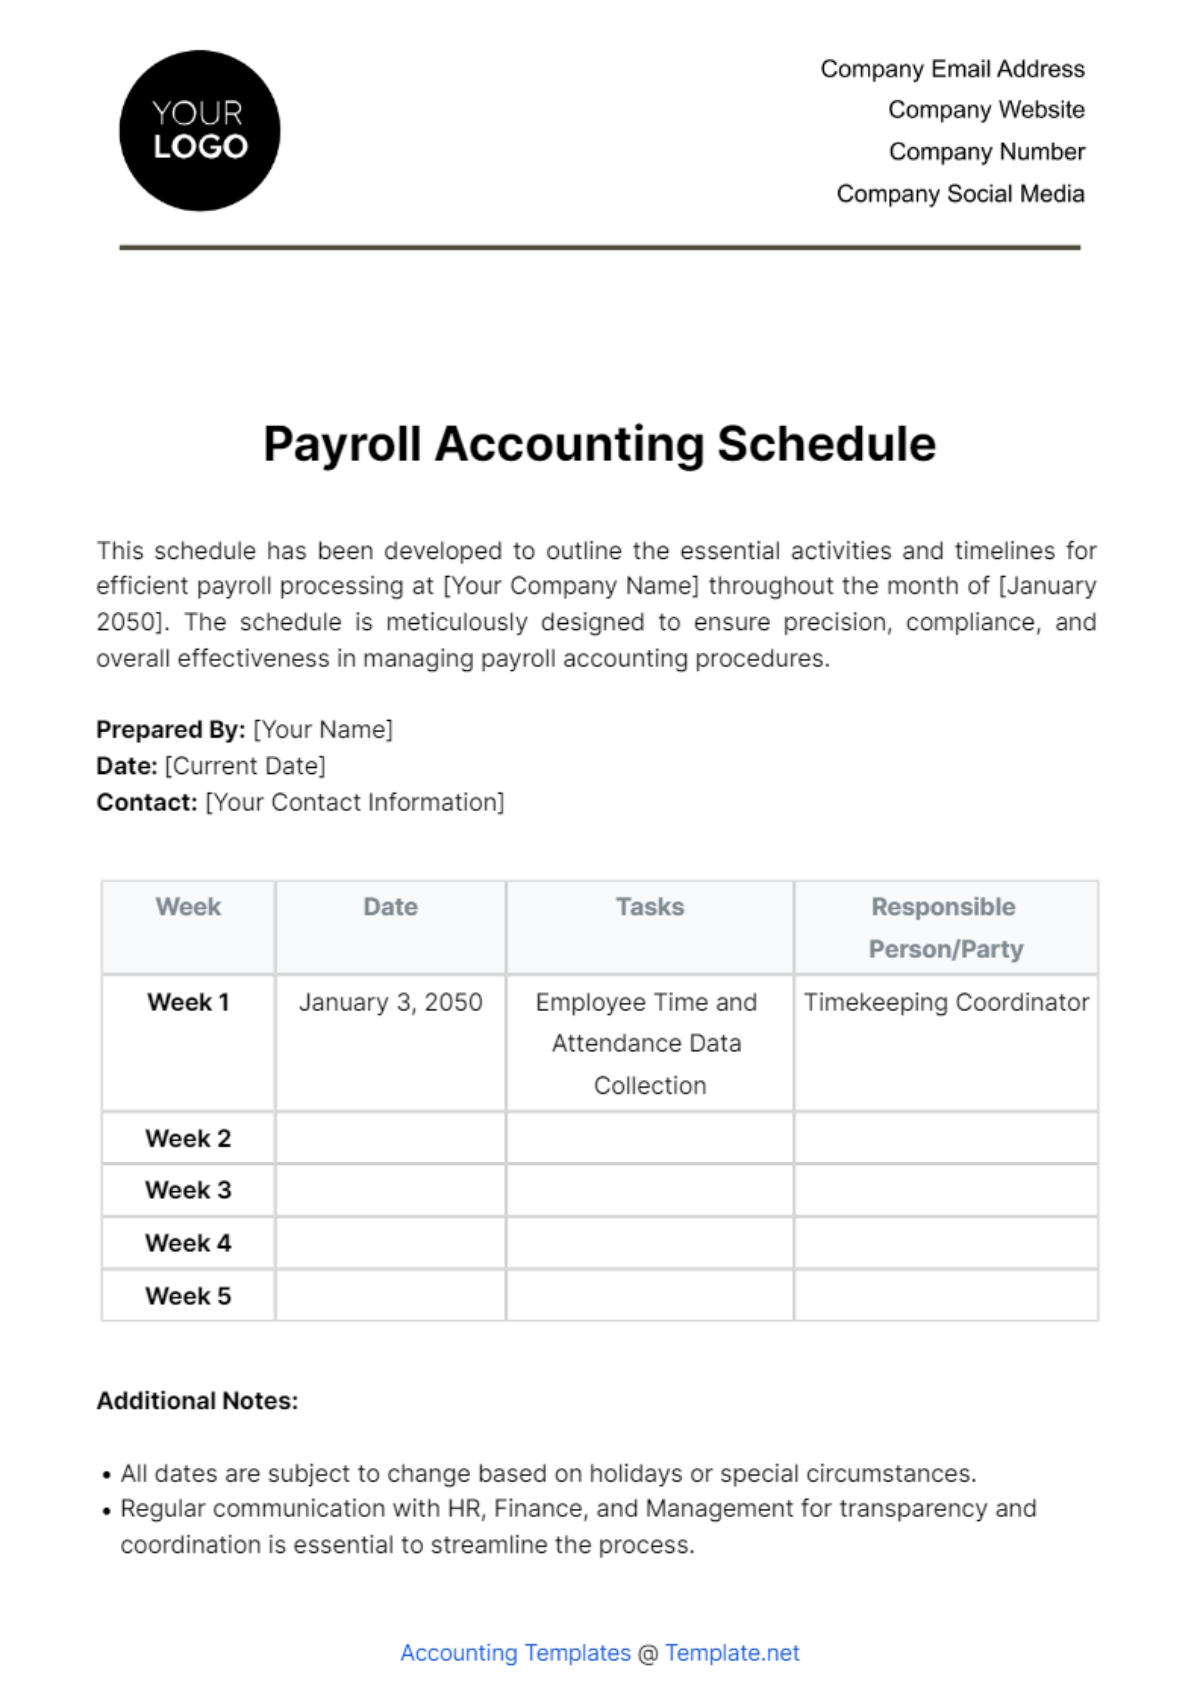 Payroll Accounting Schedule Template